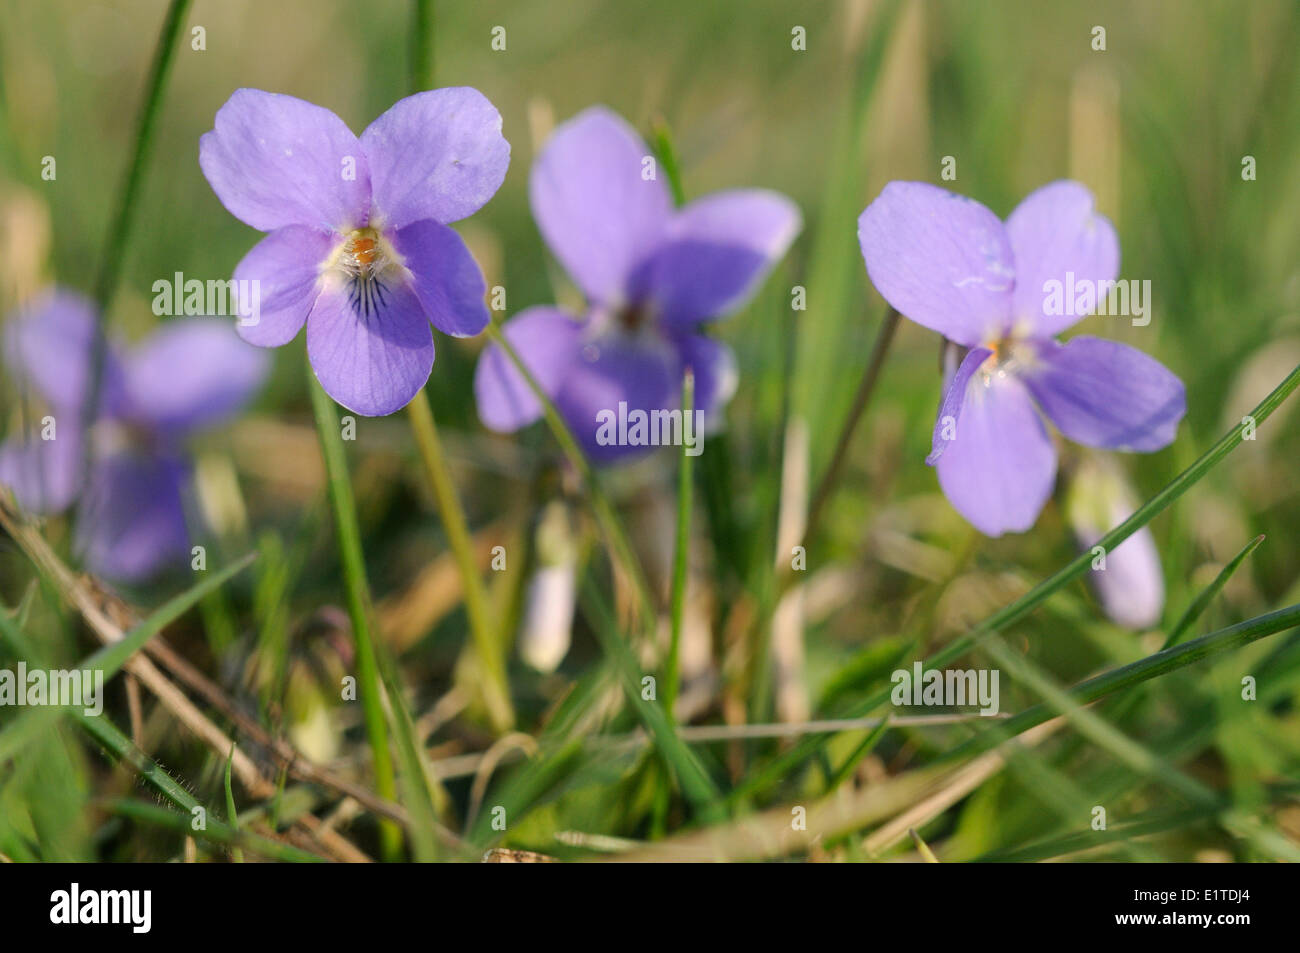 Detailed view of the flower of  Hairy Violet Stock Photo